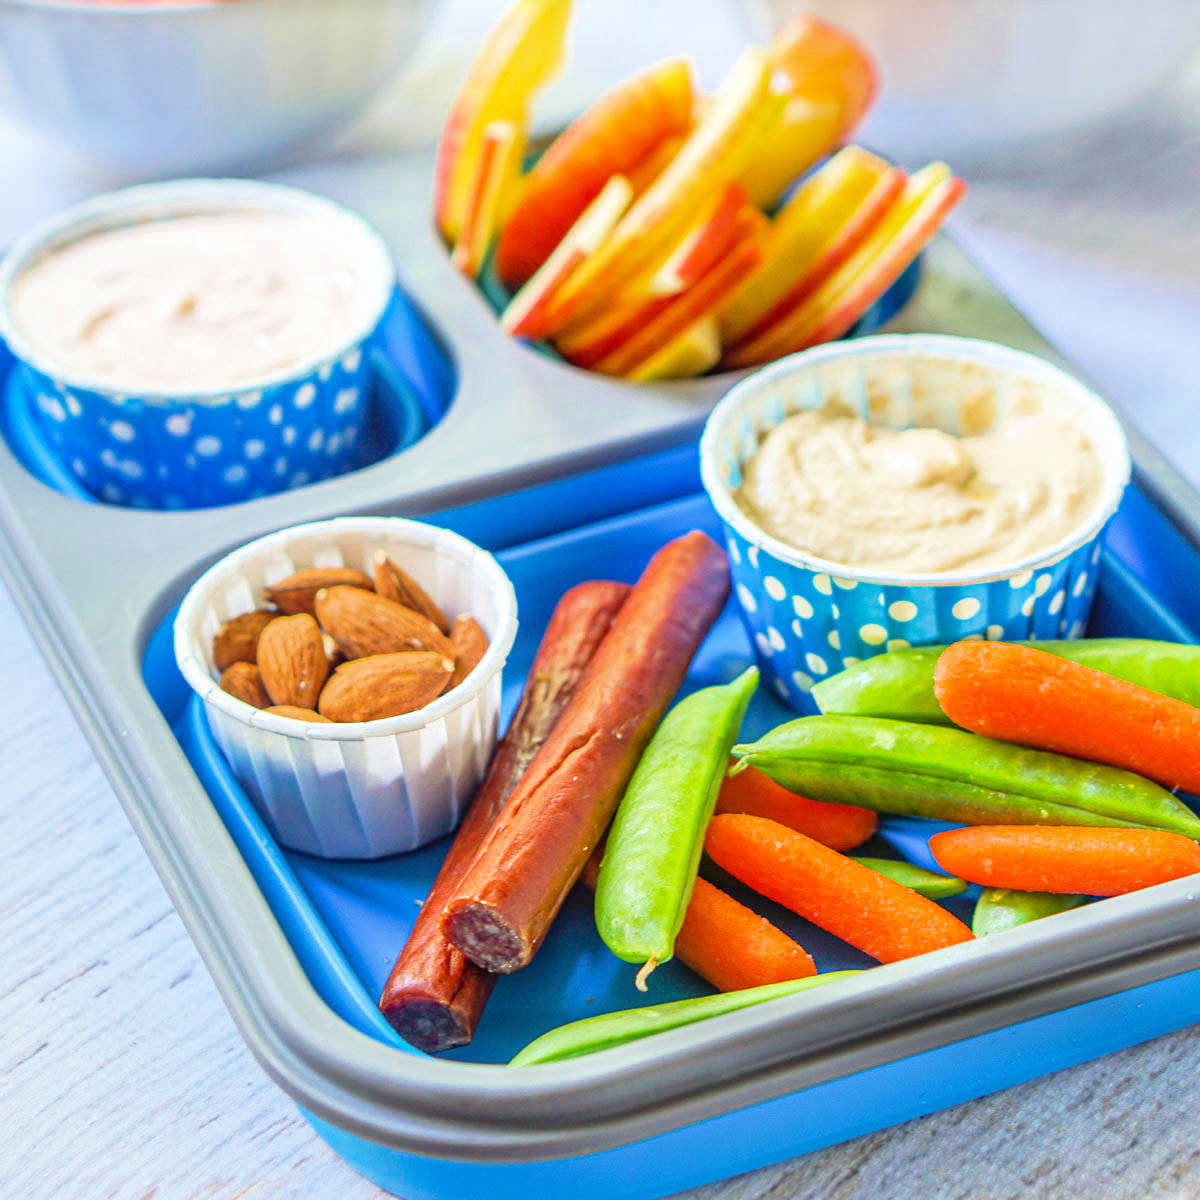 blue lunch box with hummus, almonds, beef sticks, veggies and apples